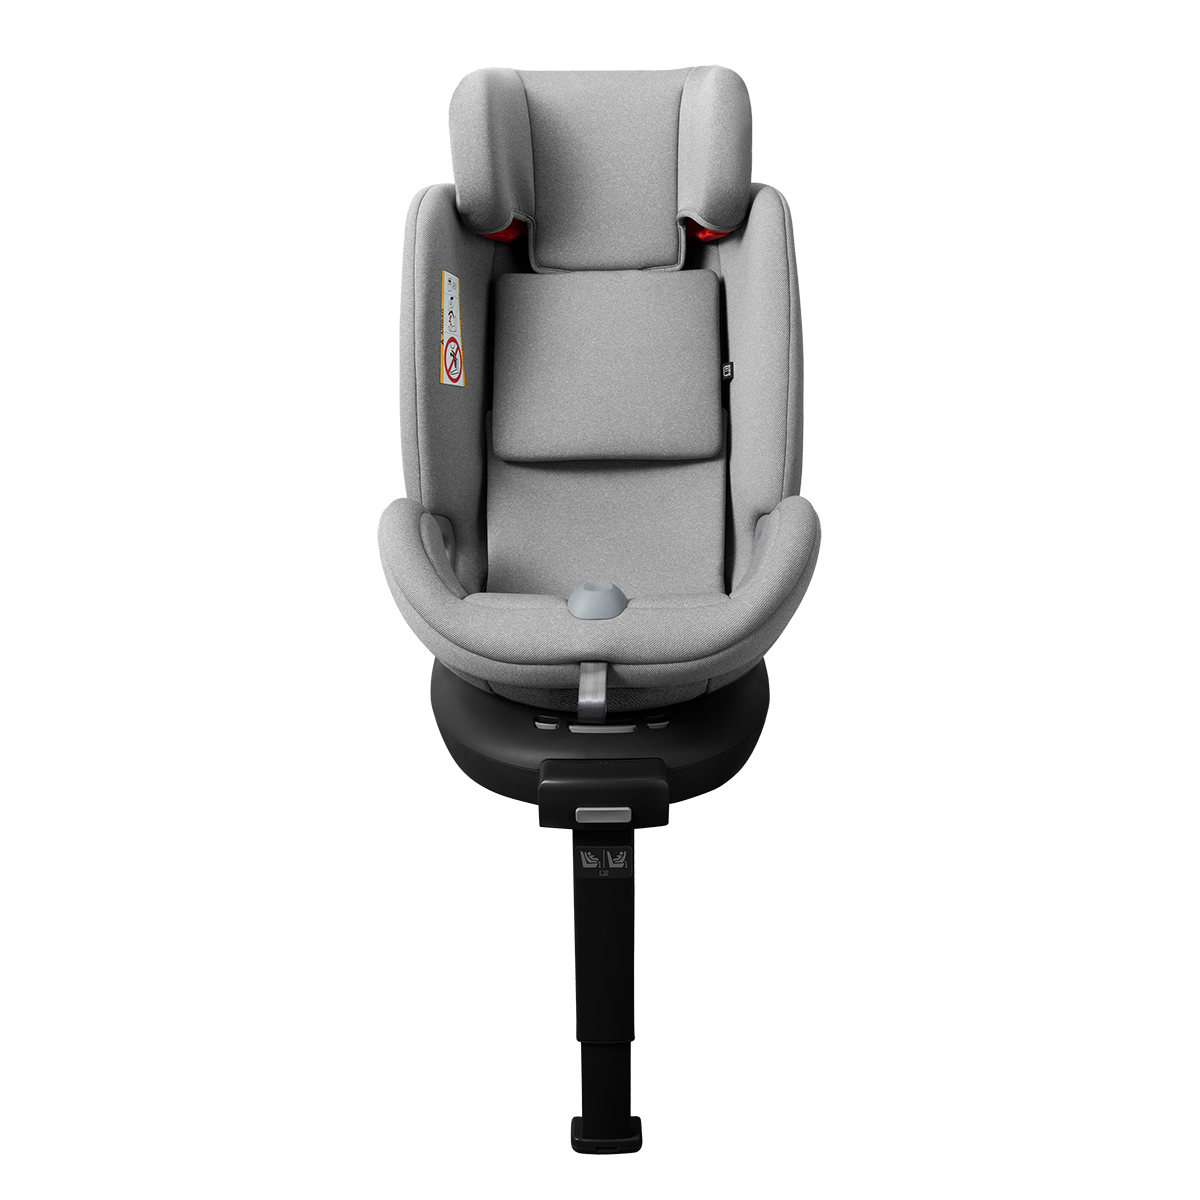 Grey Convertible Child Car Seat for 3 Year Old